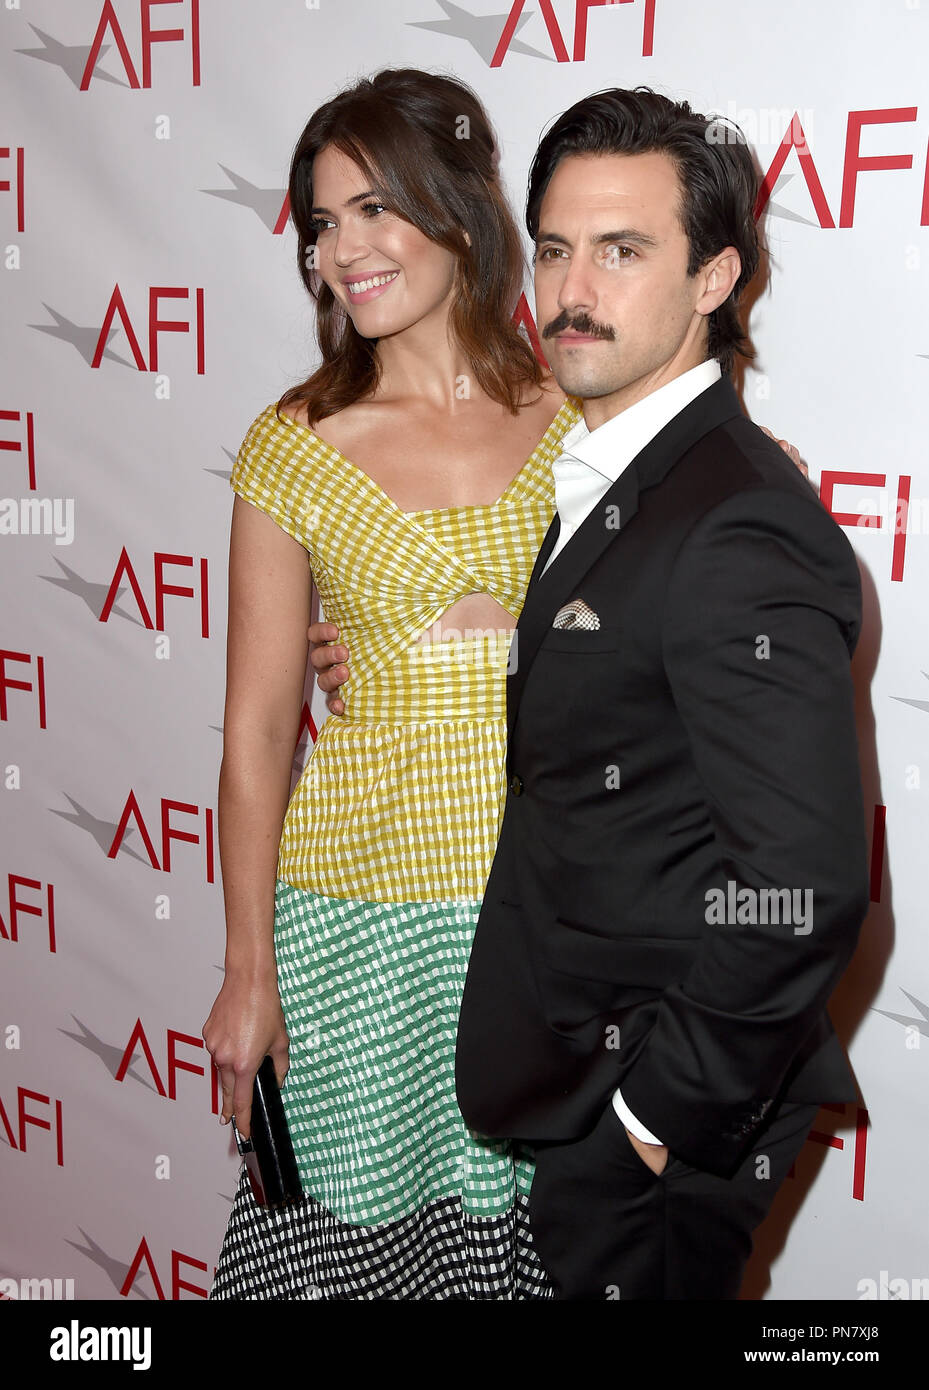 LOS ANGELES, CA - JANUARY 06:  Actors Mandy Moore (L) and Milo Ventimiglia attend the 17th annual AFI Awards at Four Seasons Los Angeles at Beverly Hills on January 6, 2017 in Los Angeles, California. Photo: AFI Stock Photo